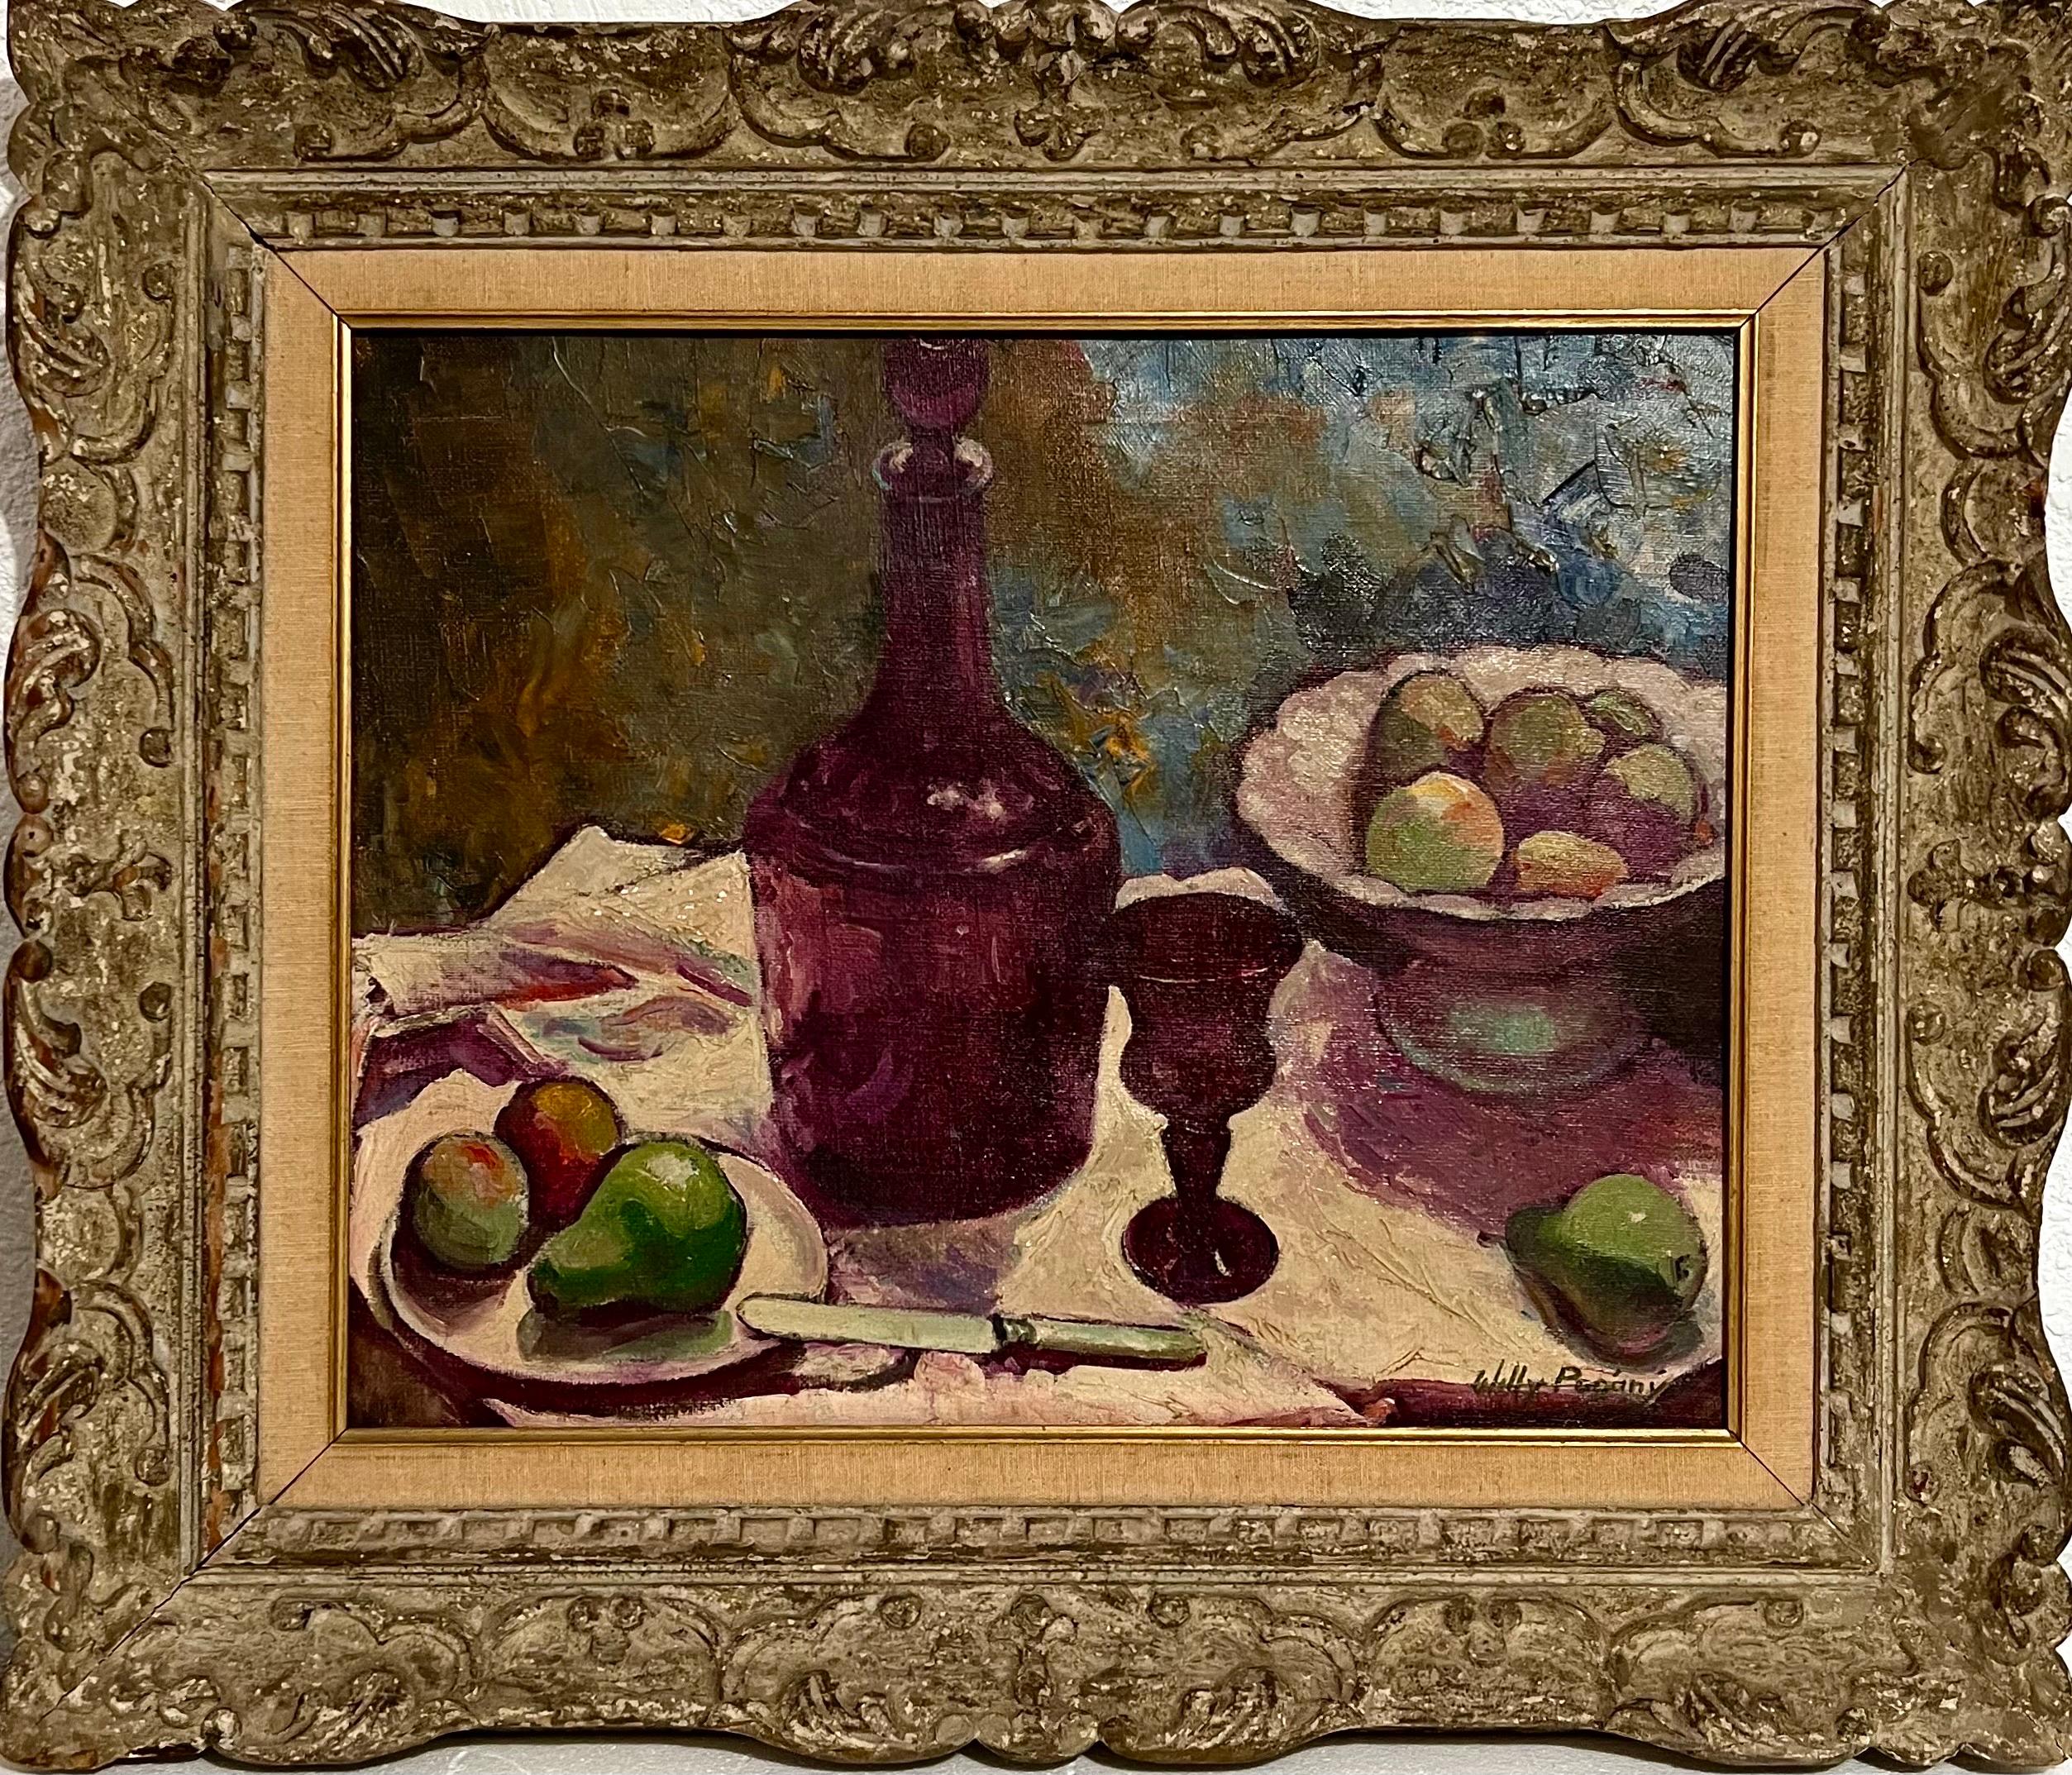 Still life of fruit (with purple glass or crystal)
Hand signed lower right 
Dimensions: (Frame) H 24